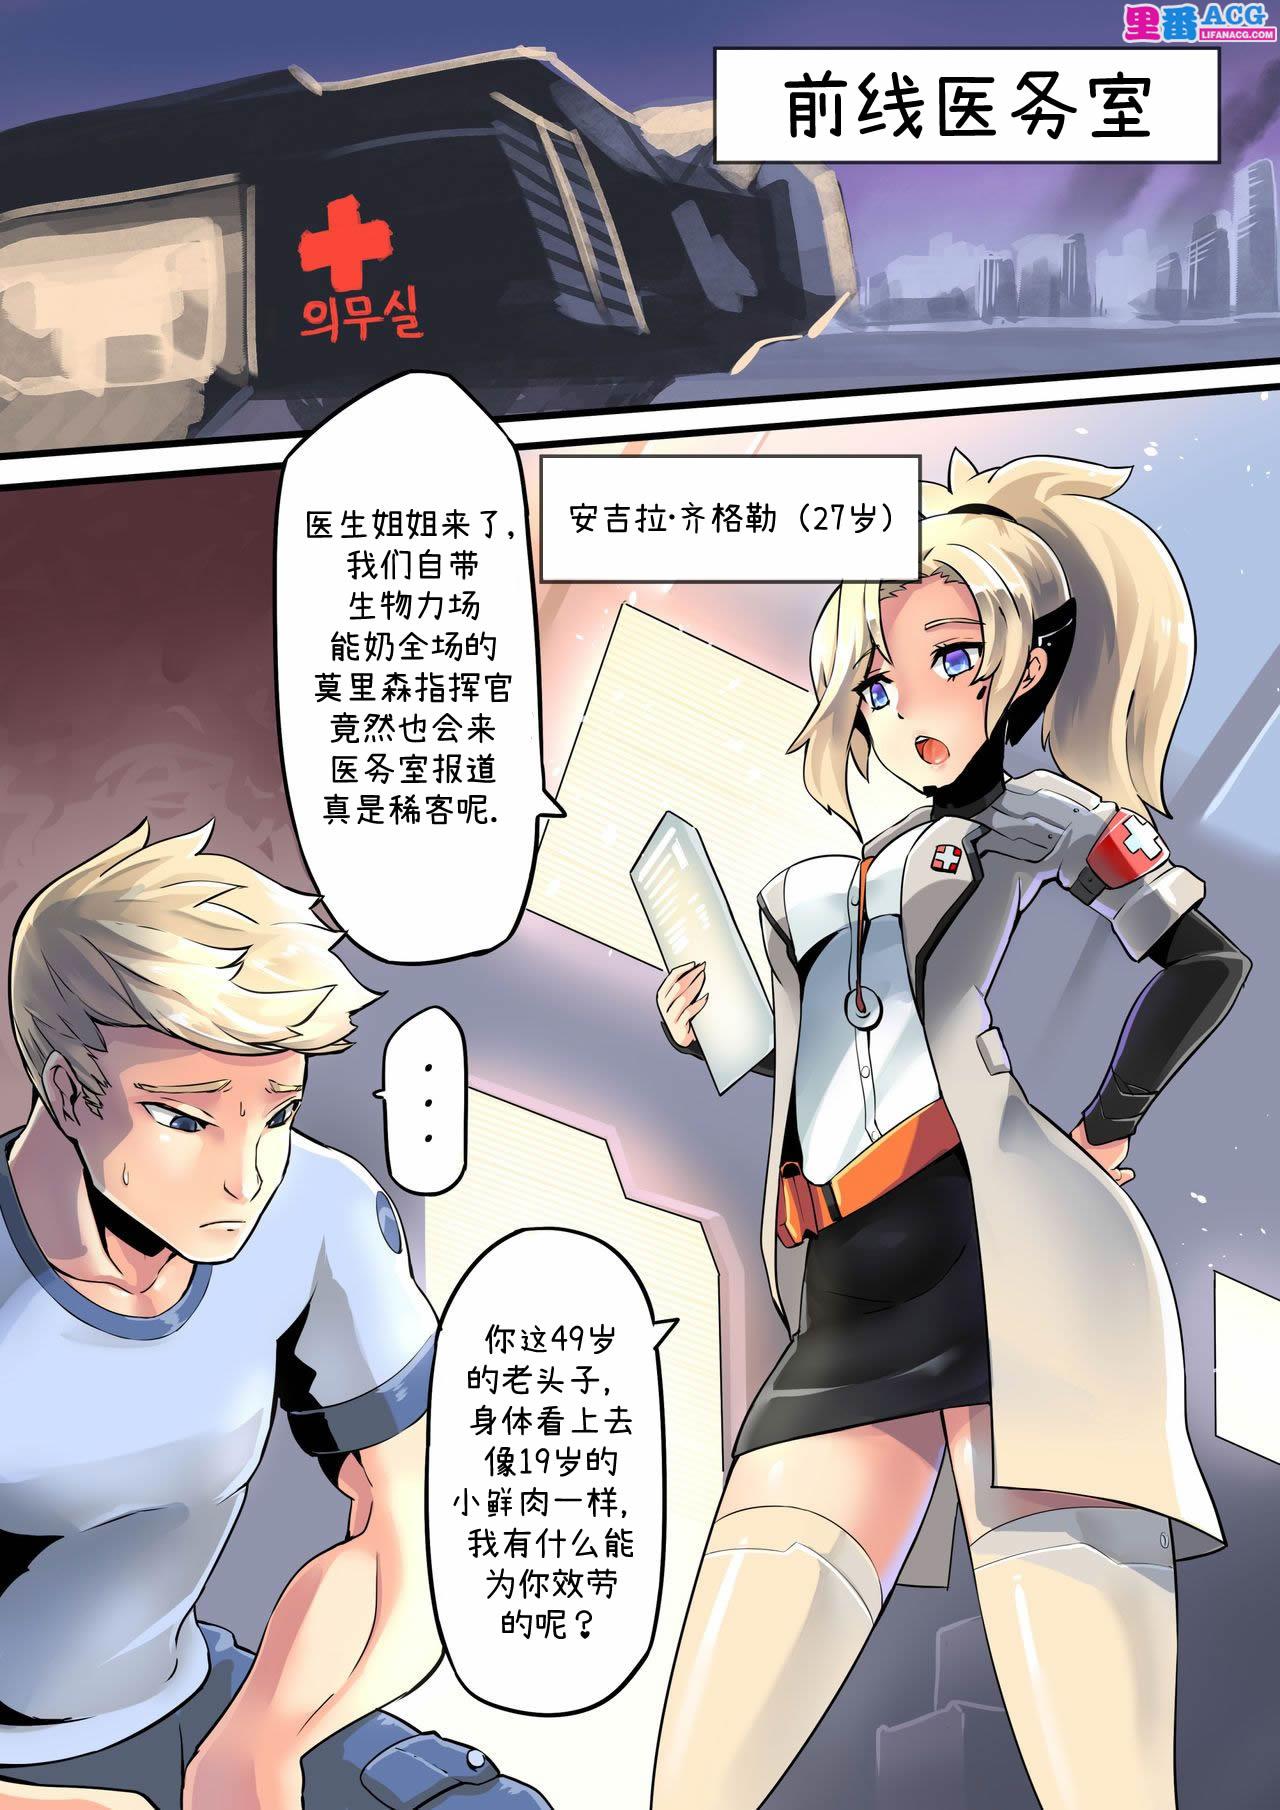 Mercy Therapy 2